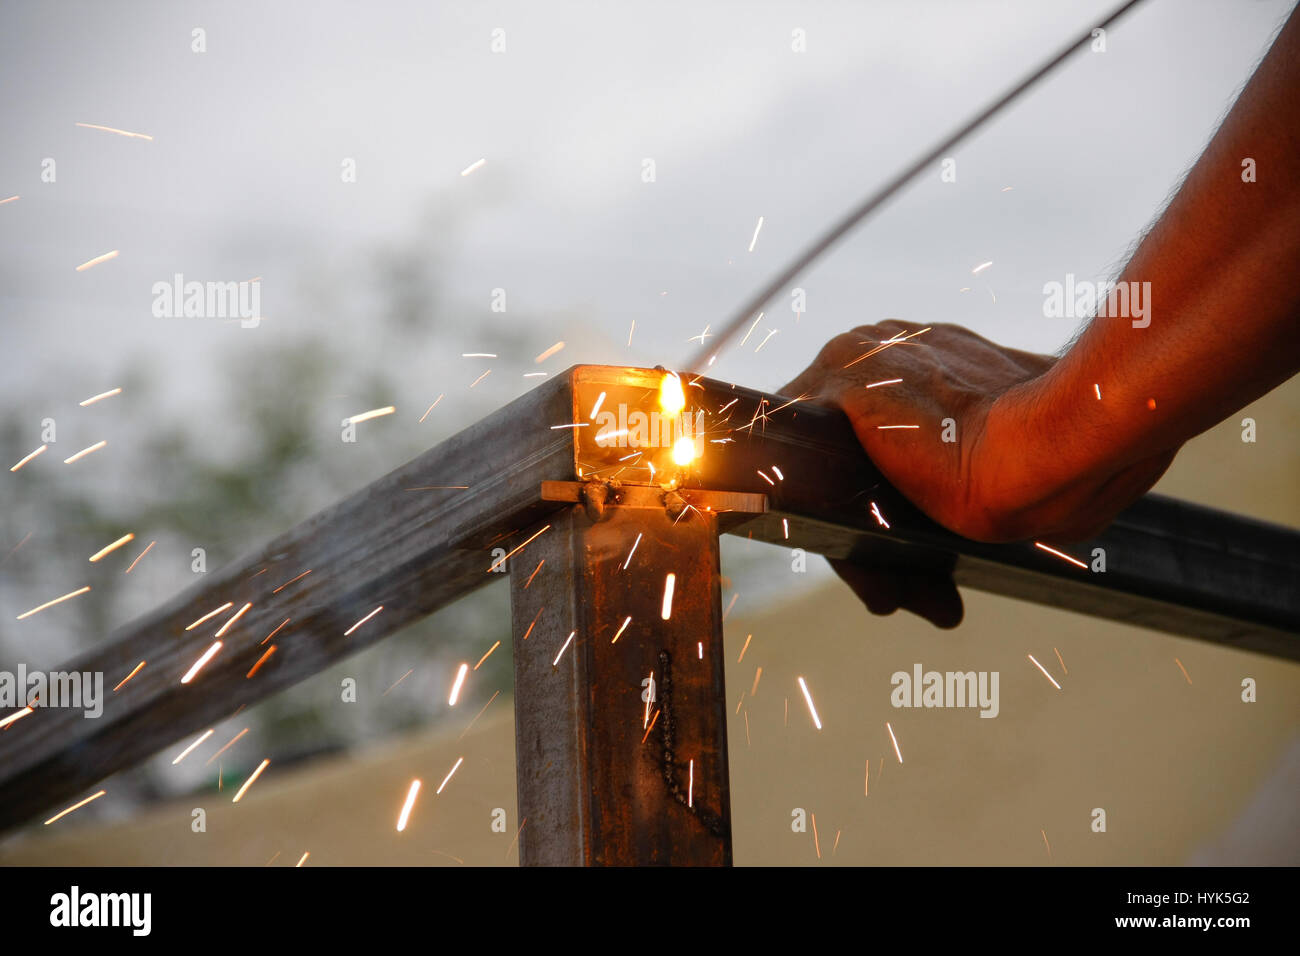 welding steel with spread spark and lighting around Stock Photo